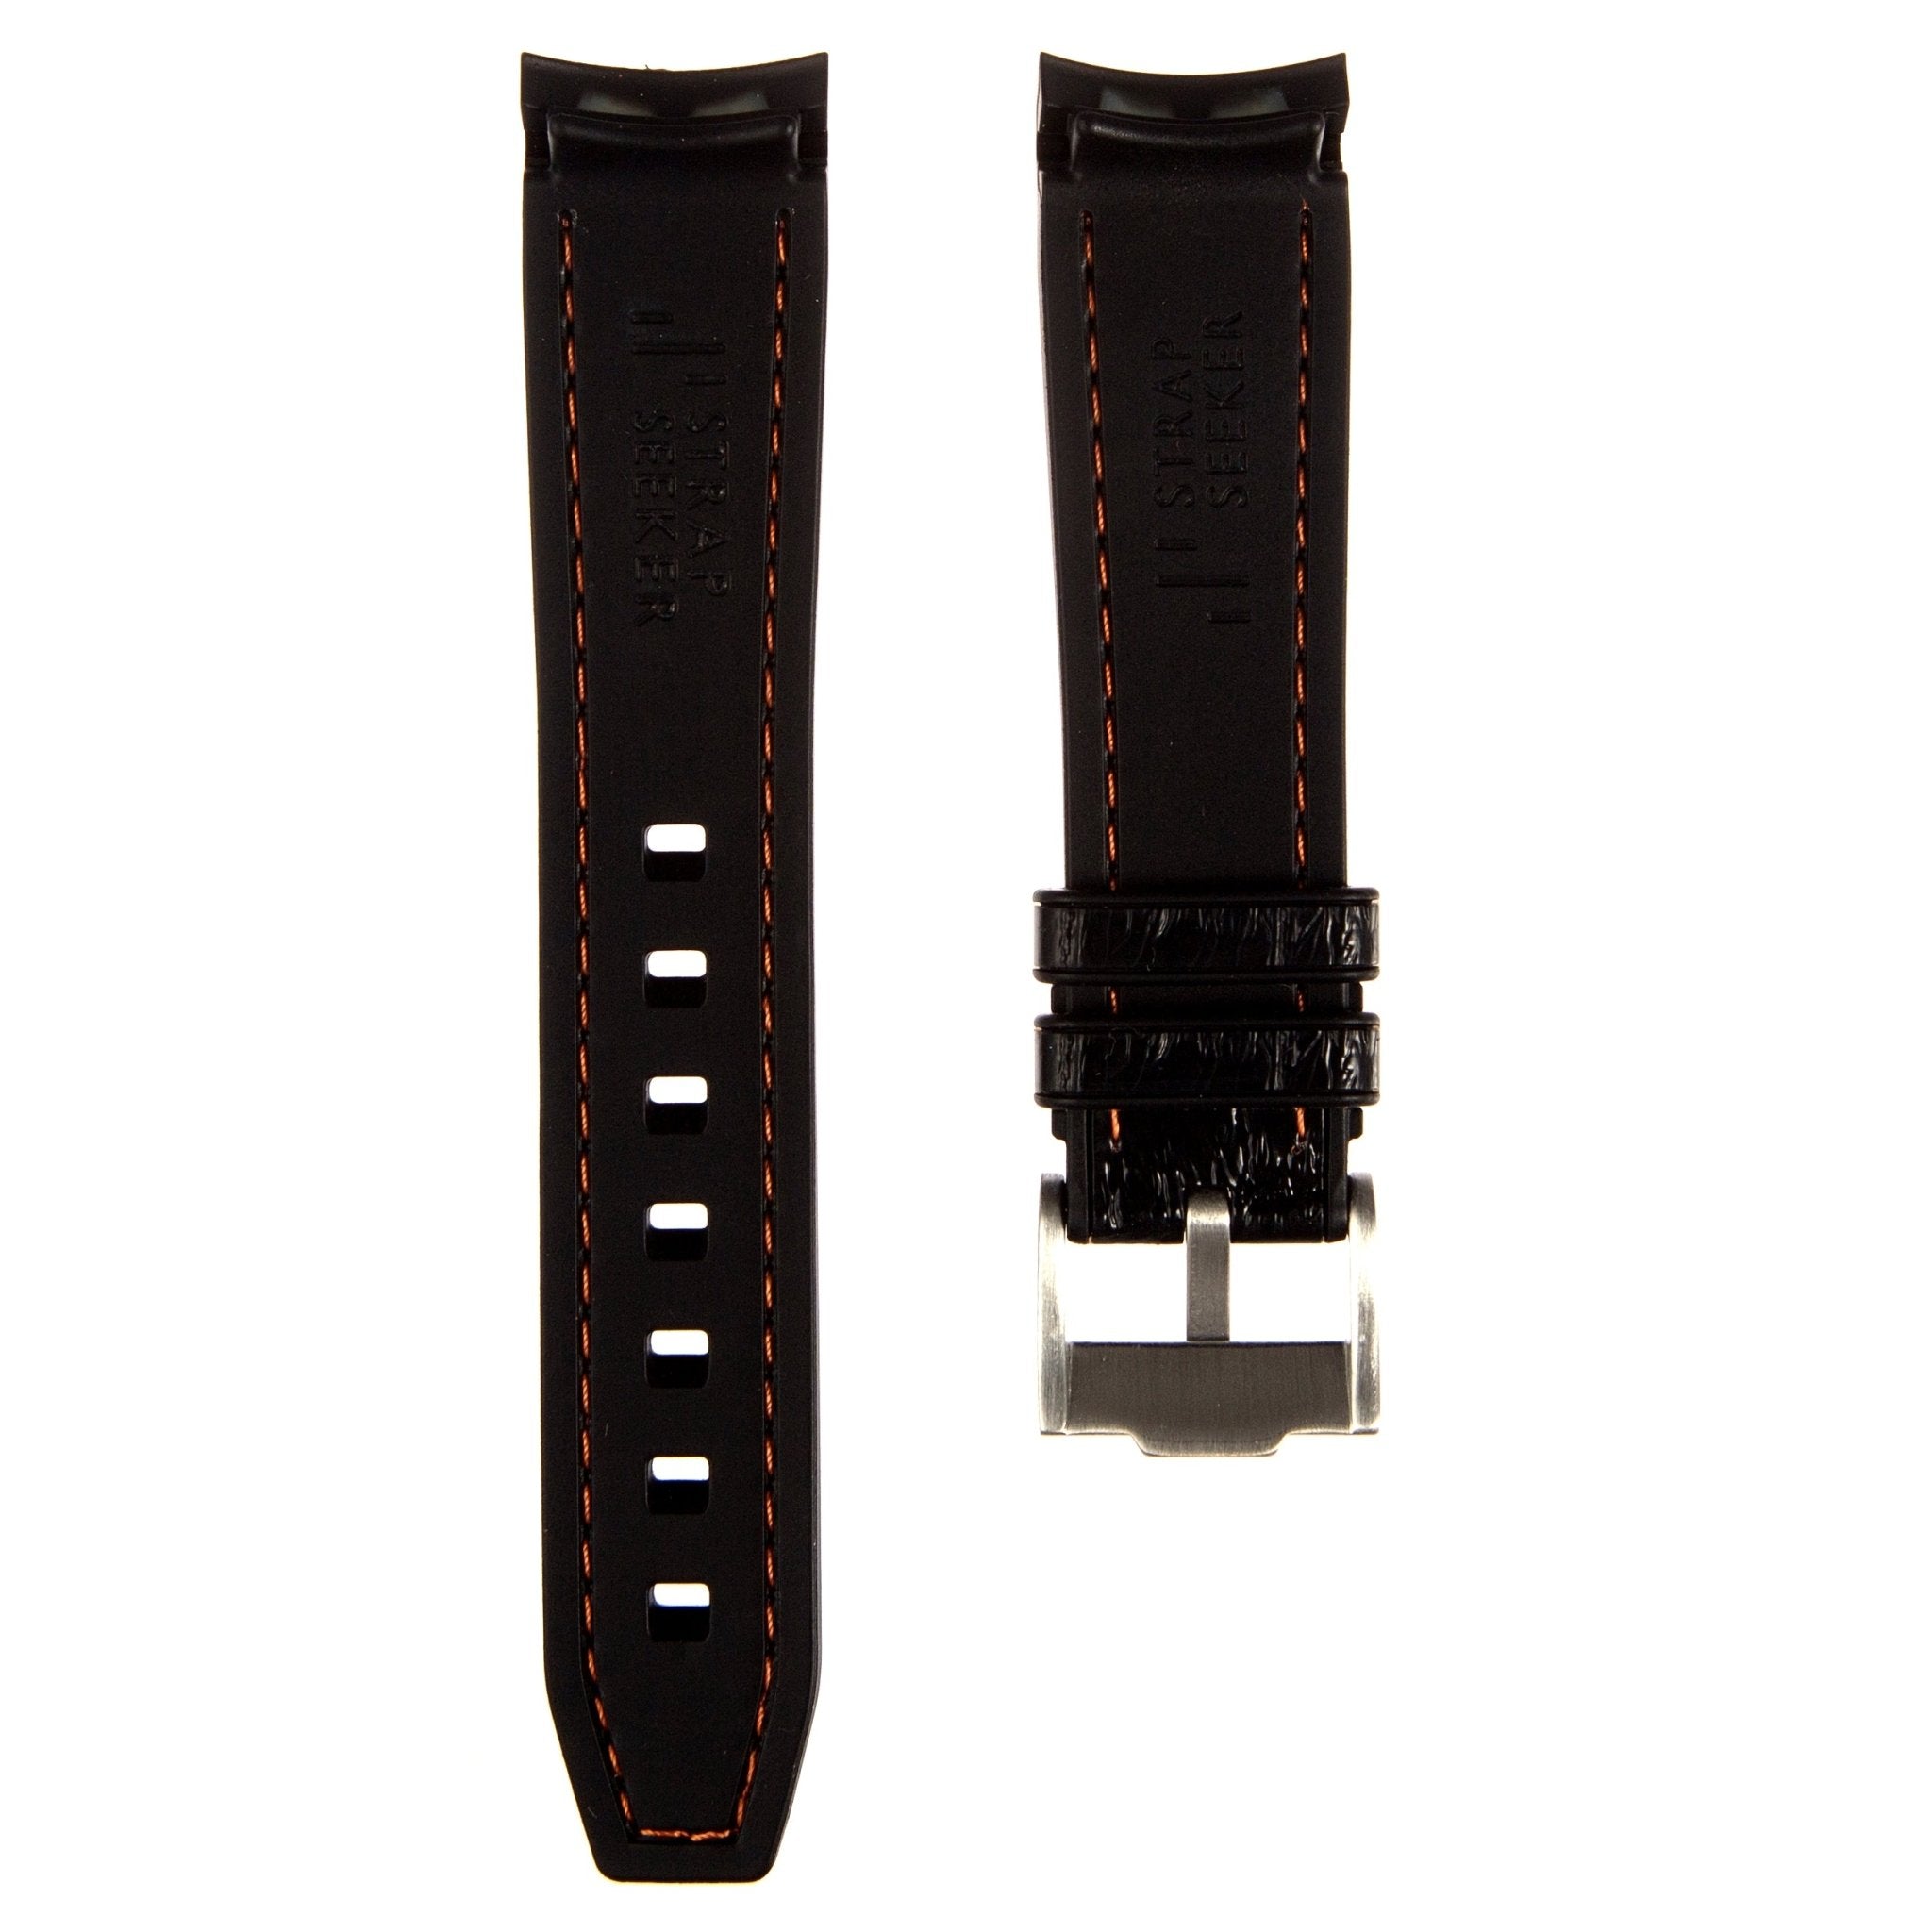 Alligator Embossed Curved End Premium Silicone Strap - Compatible with Rolex Submariner - Black with Orange Stitch (2406) -StrapSeeker